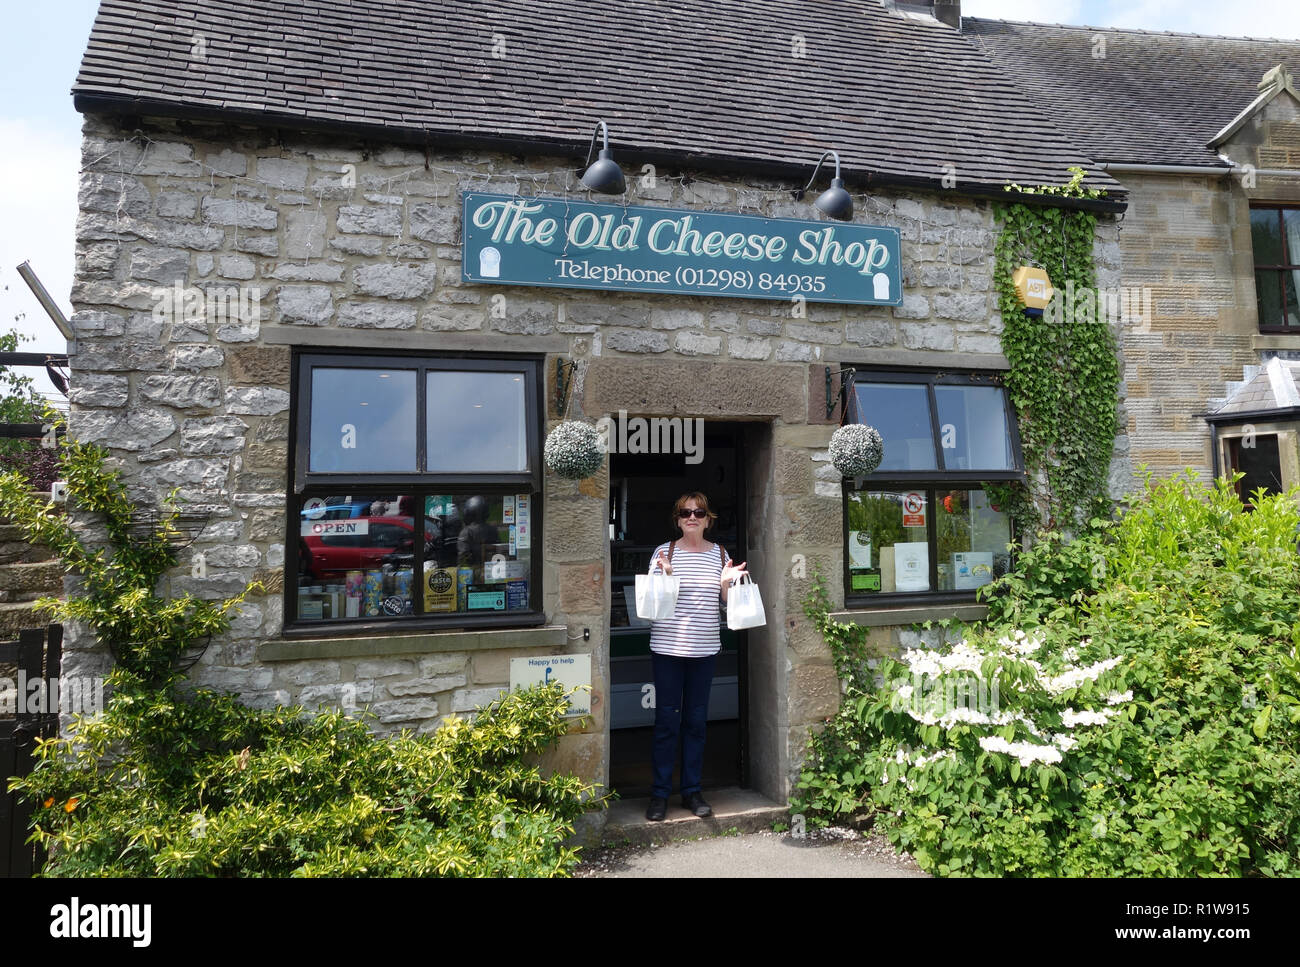 The Old Cheese Shop in Hartington in the Peak District Uk Stock Photo